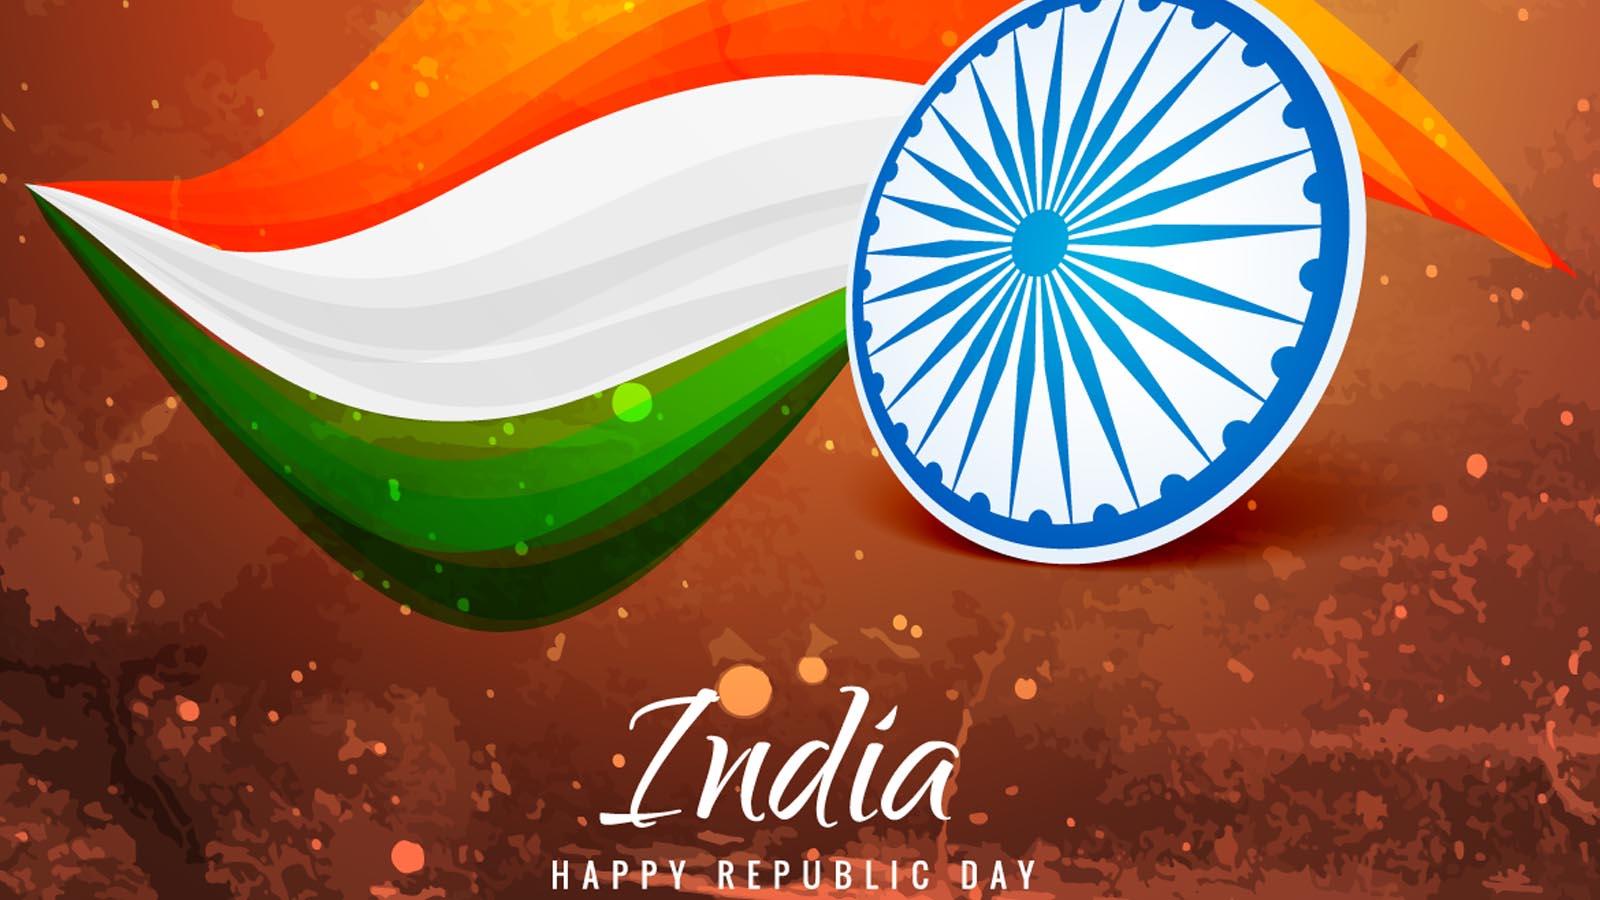 Indian Republic Day Wishes in Hindi 26 Jan Images, Photos.jpg